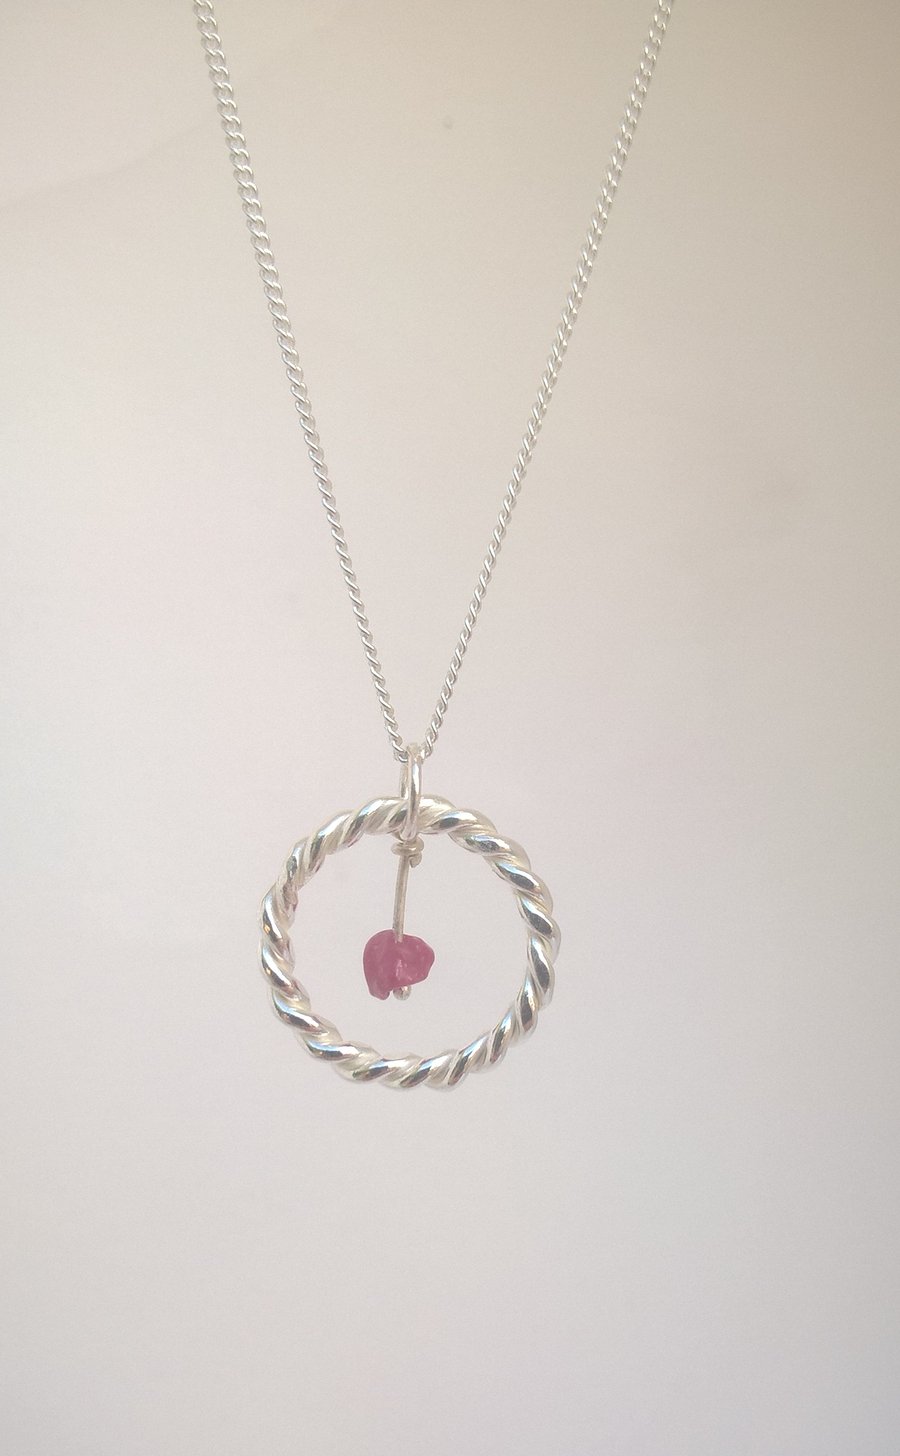 Silver & Ruby Necklace